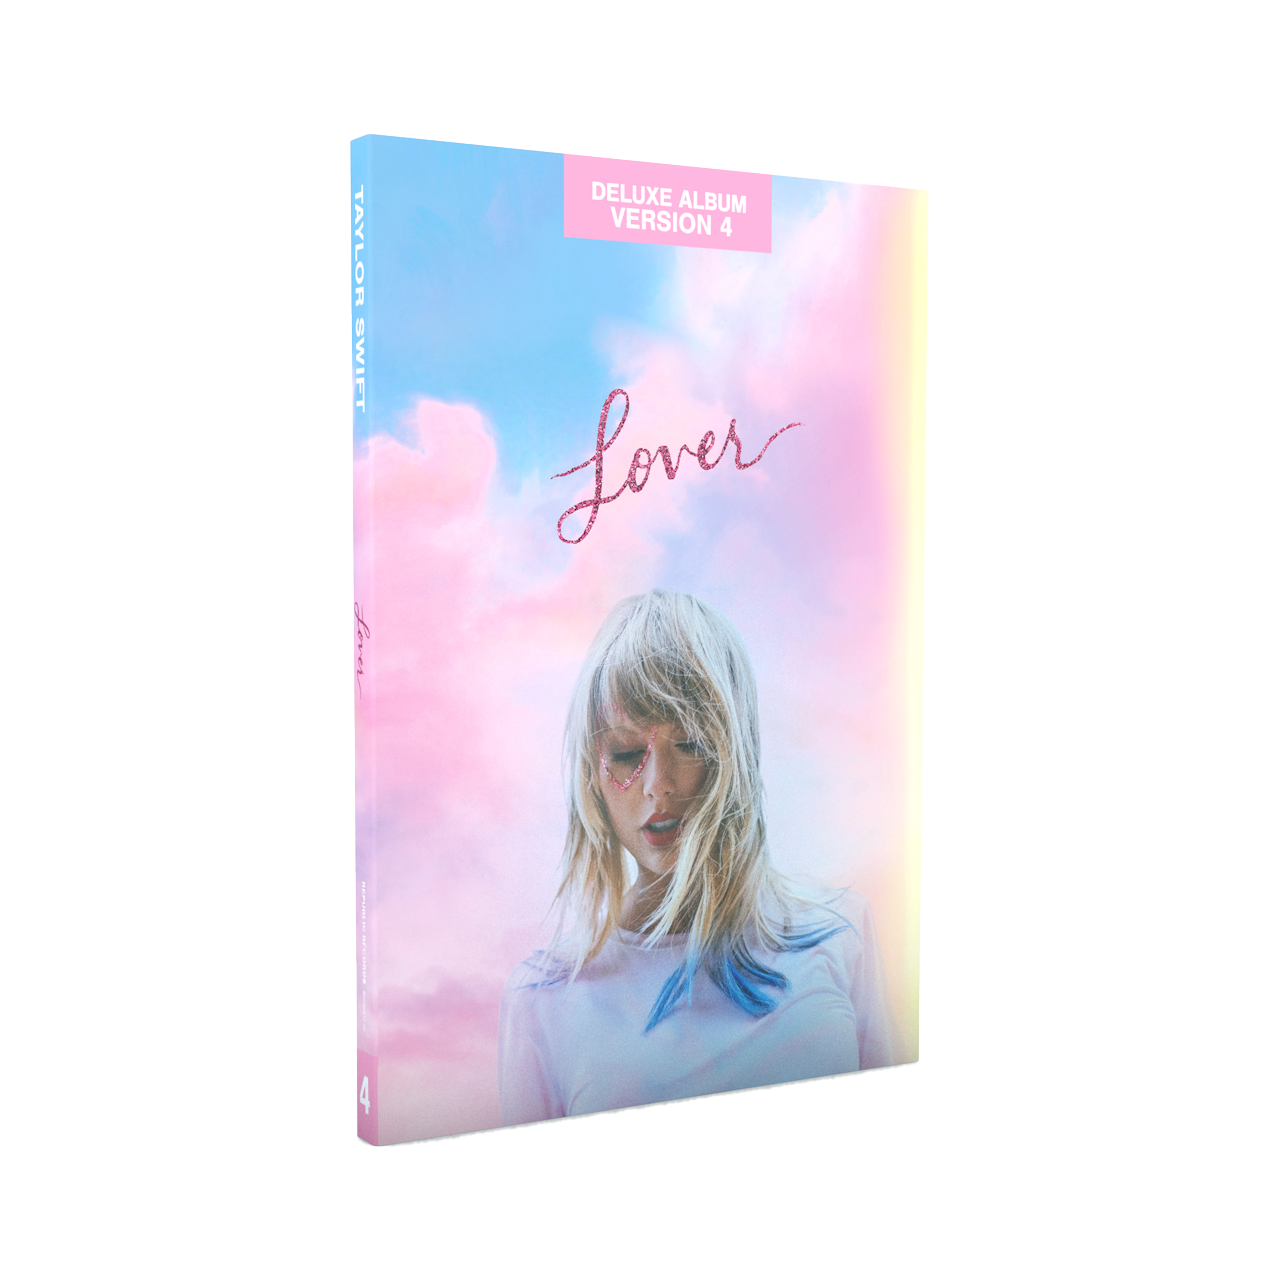 Lover CD Deluxe Version 4 Front Cover